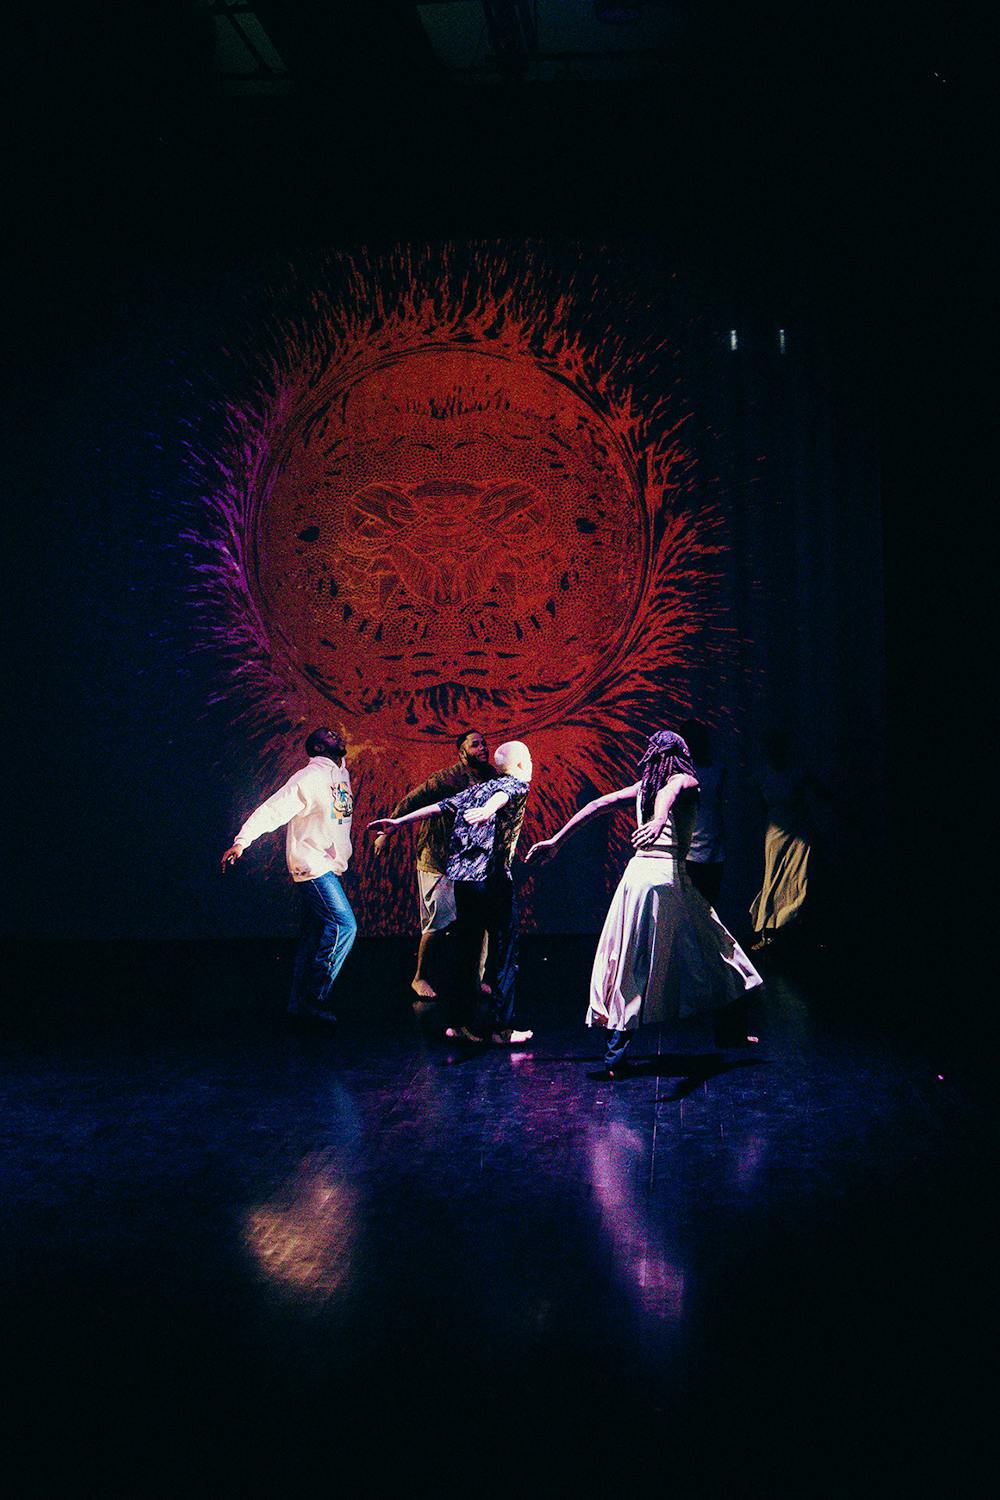 INSPIRIT dance company's performance, "What We Ask of Flesh" took place last weekend in Mahaney Arts Center.